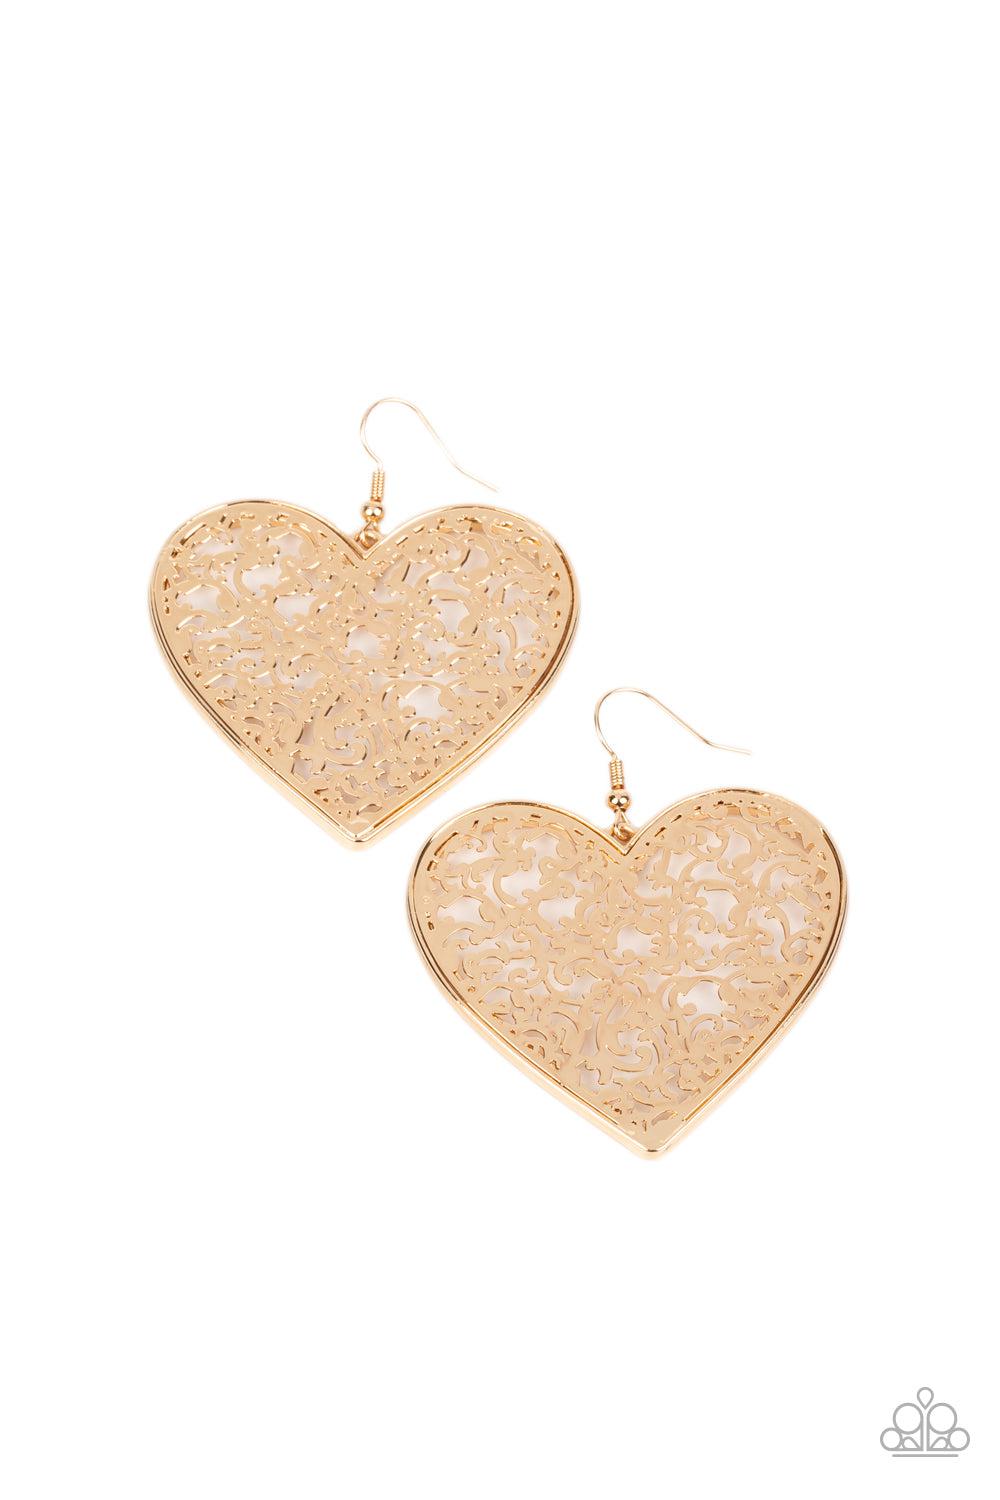 Fairest in the Land Gold Heart Earrings - Paparazzi Accessories- lightbox - CarasShop.com - $5 Jewelry by Cara Jewels